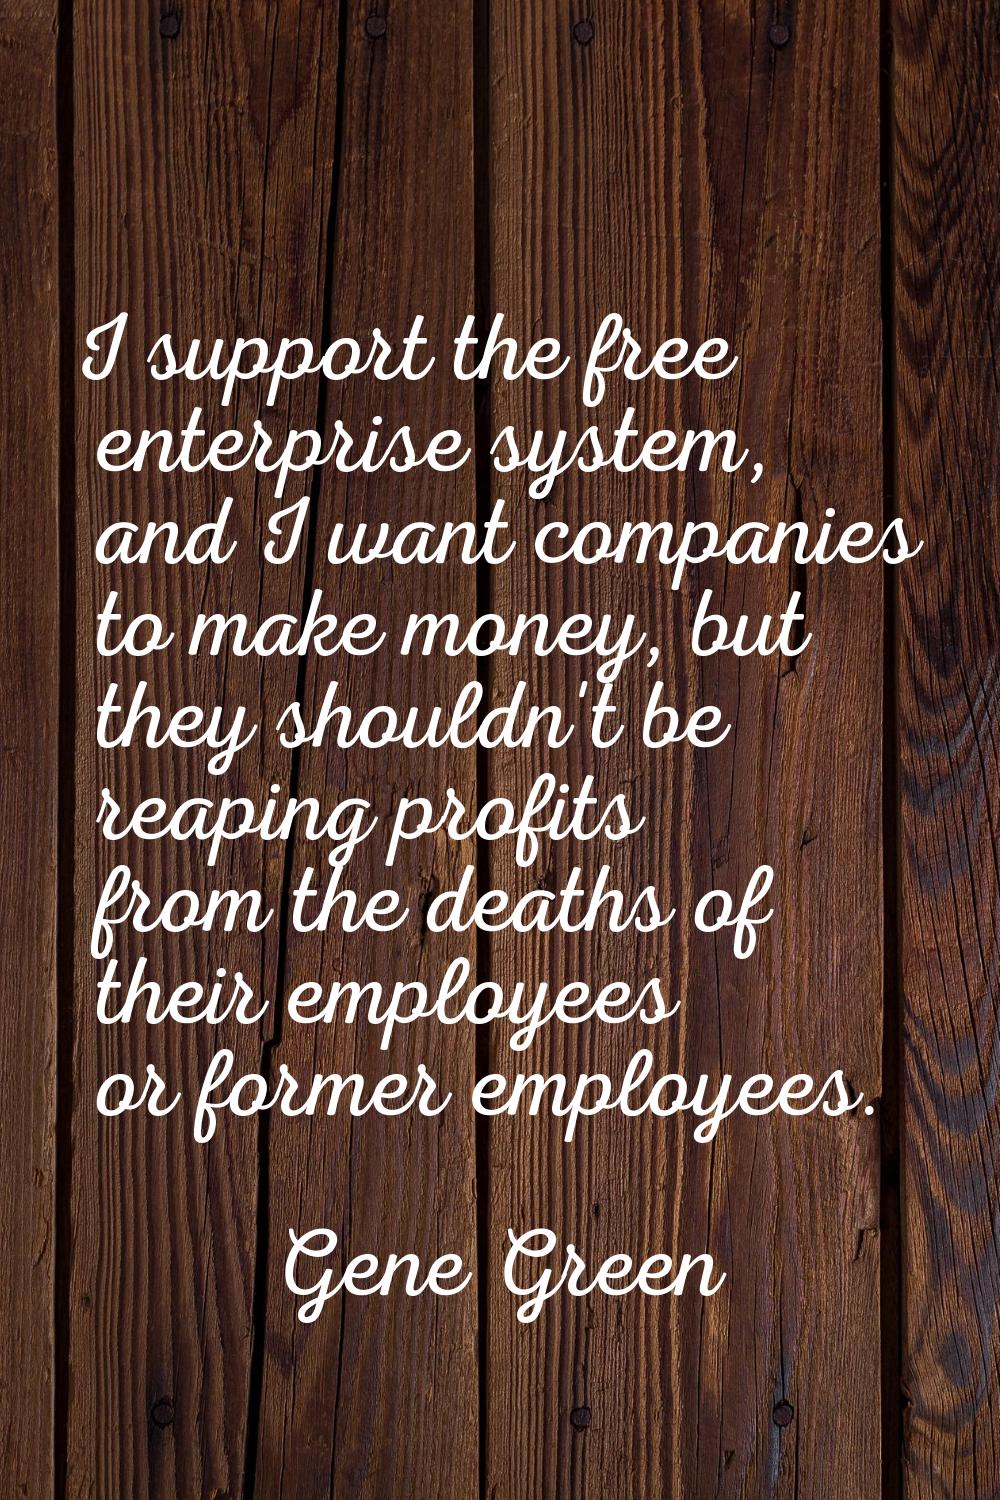 I support the free enterprise system, and I want companies to make money, but they shouldn't be rea